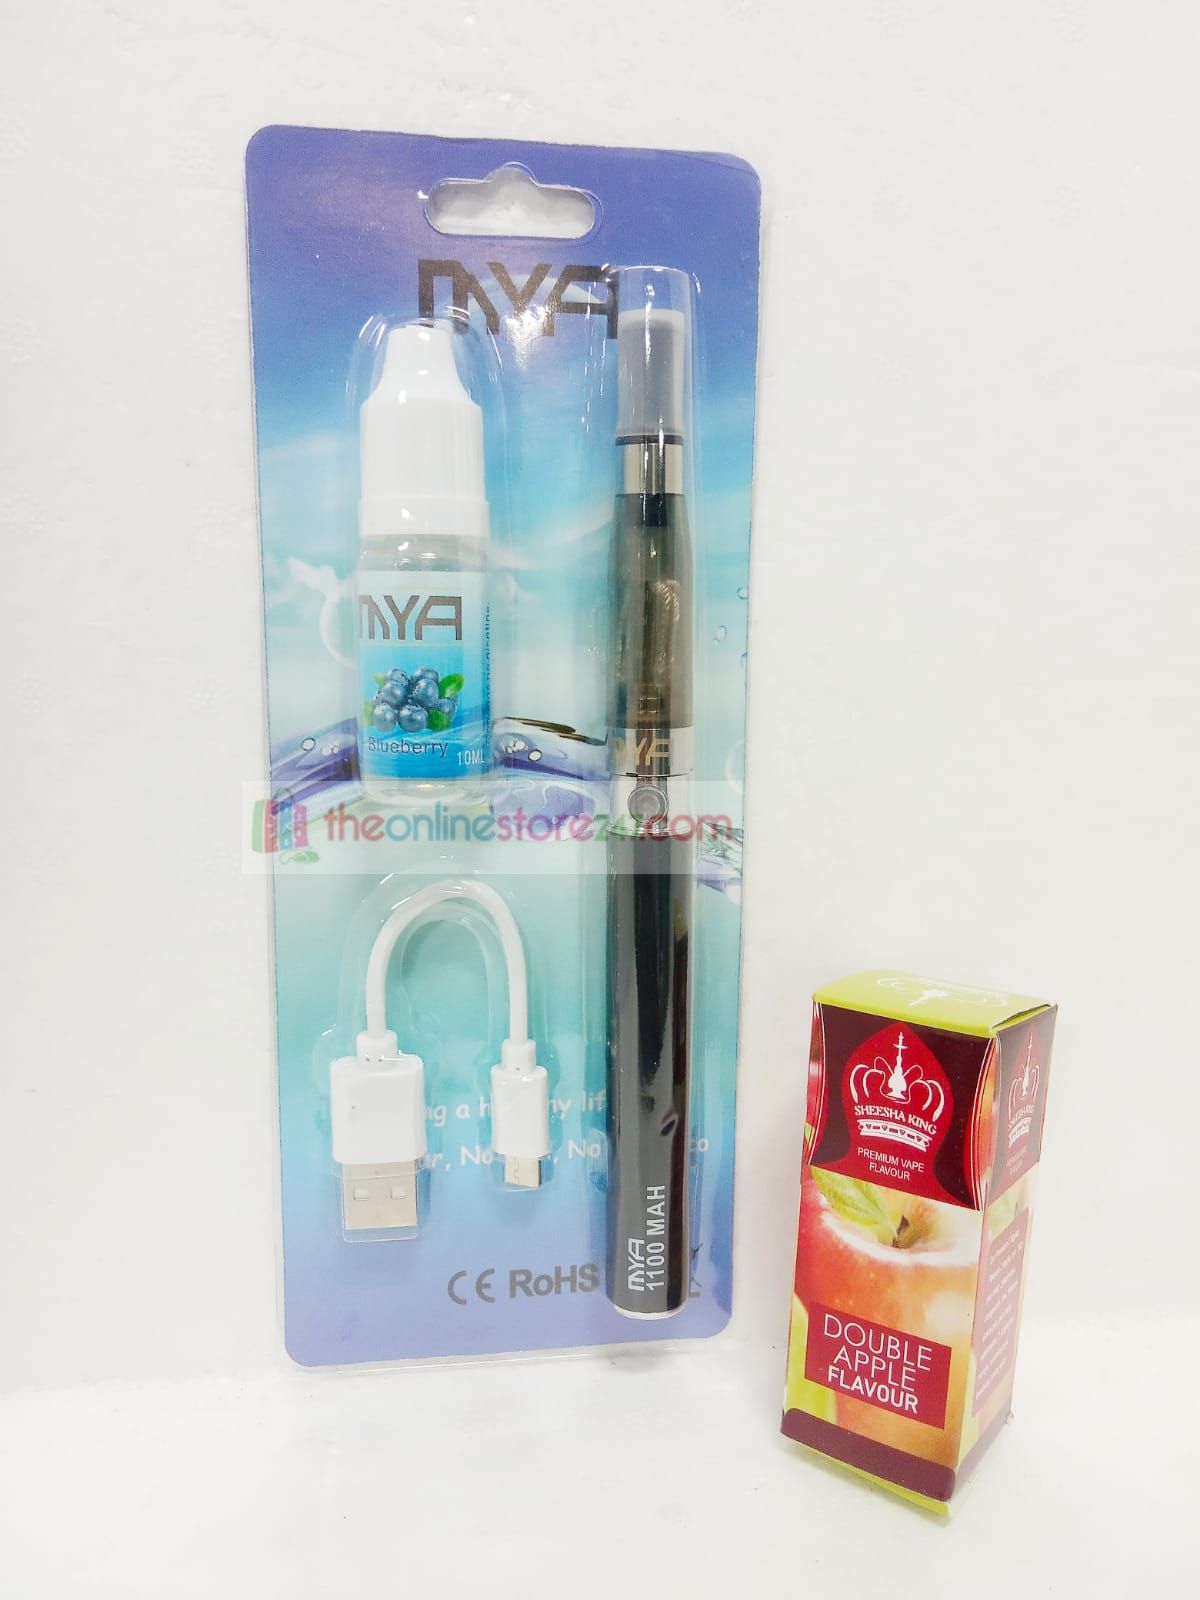 New Mya E Vape Pen Hookah With One Mya Flavour And One Free Sheesha King Assorted Flavour Juice Store At Your Finger Tips